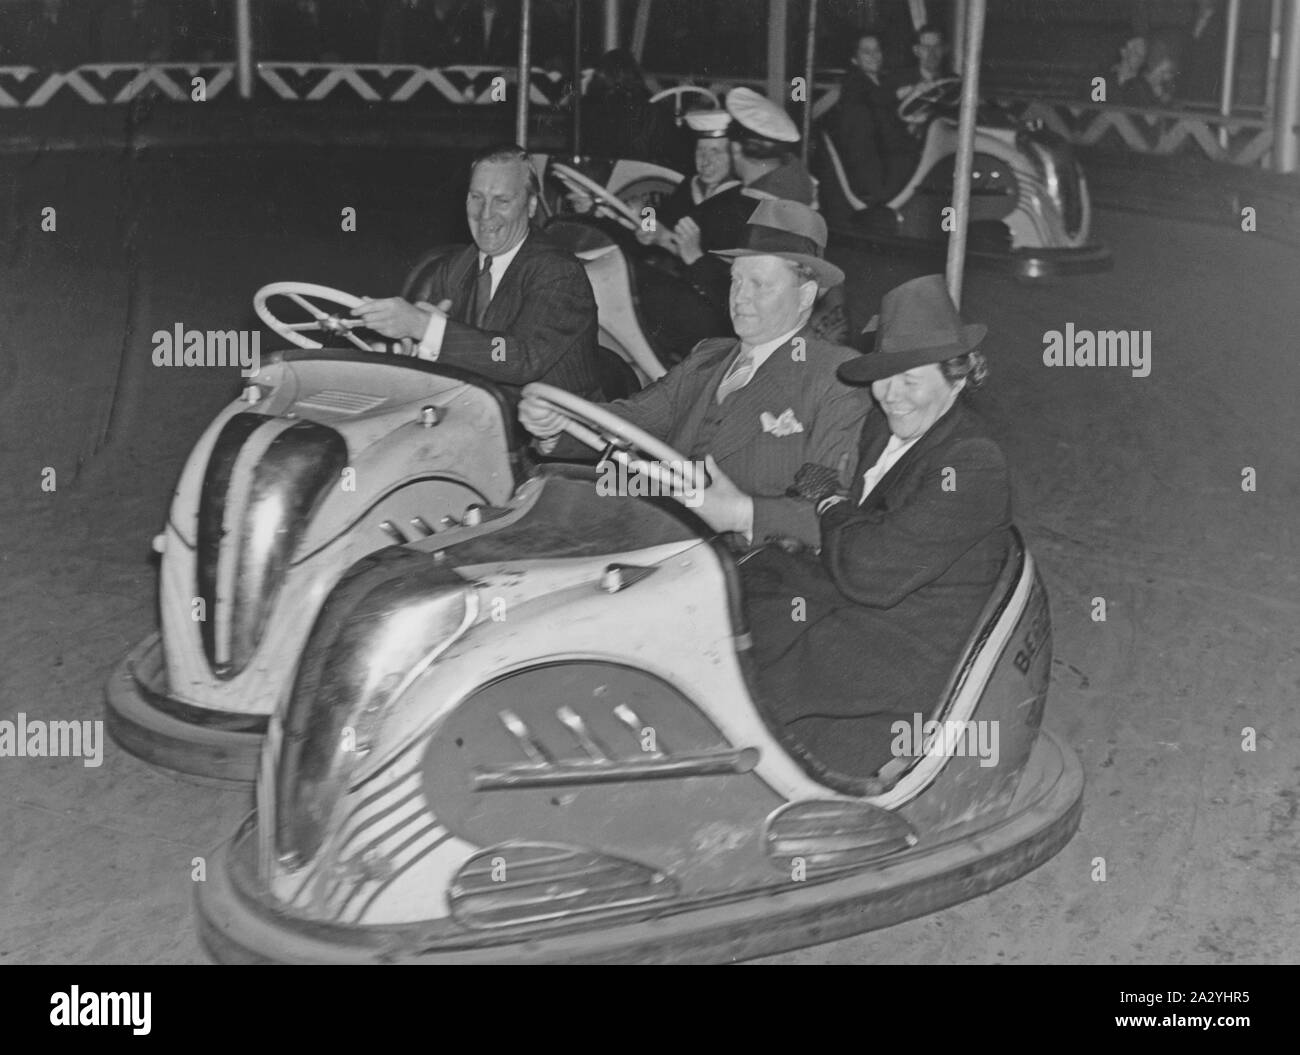 Amusement park in the 1940s. No matter old or young, bumper cars are one of the favorite attractions. Pictured a older couple driving and having fun. Sweden 1940s. Stock Photo